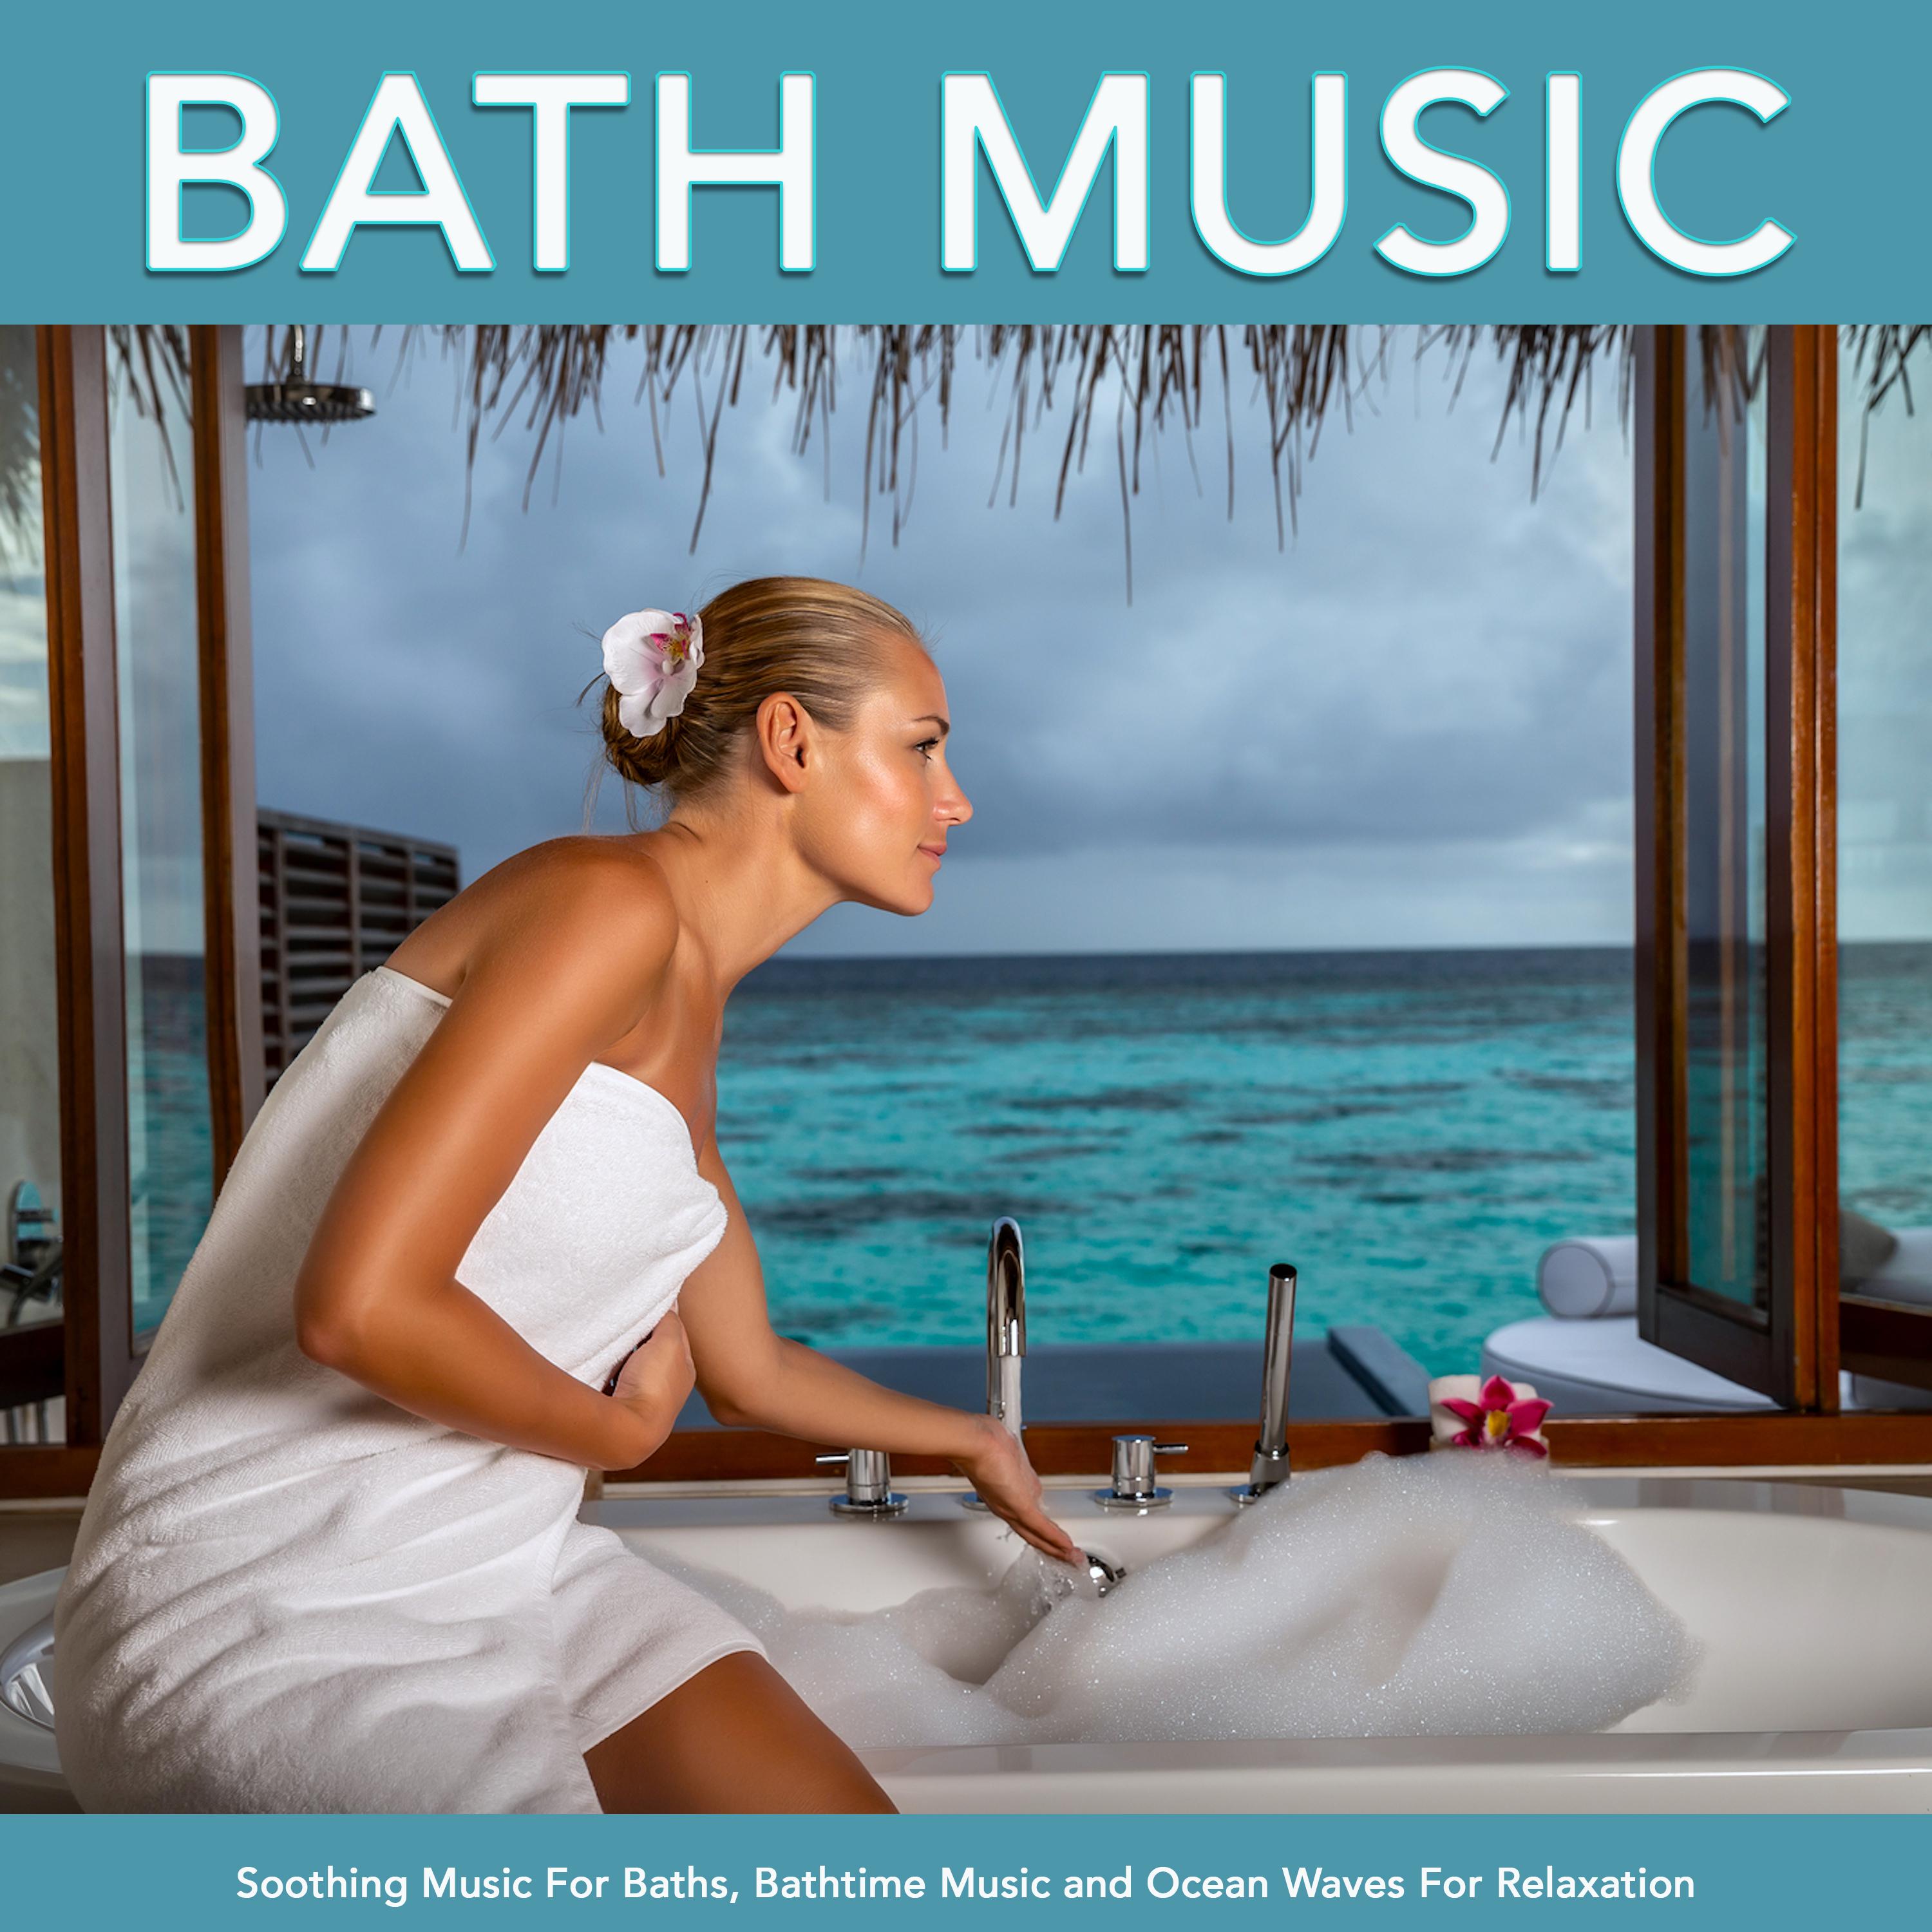 Music with Ocean Waves For Baths